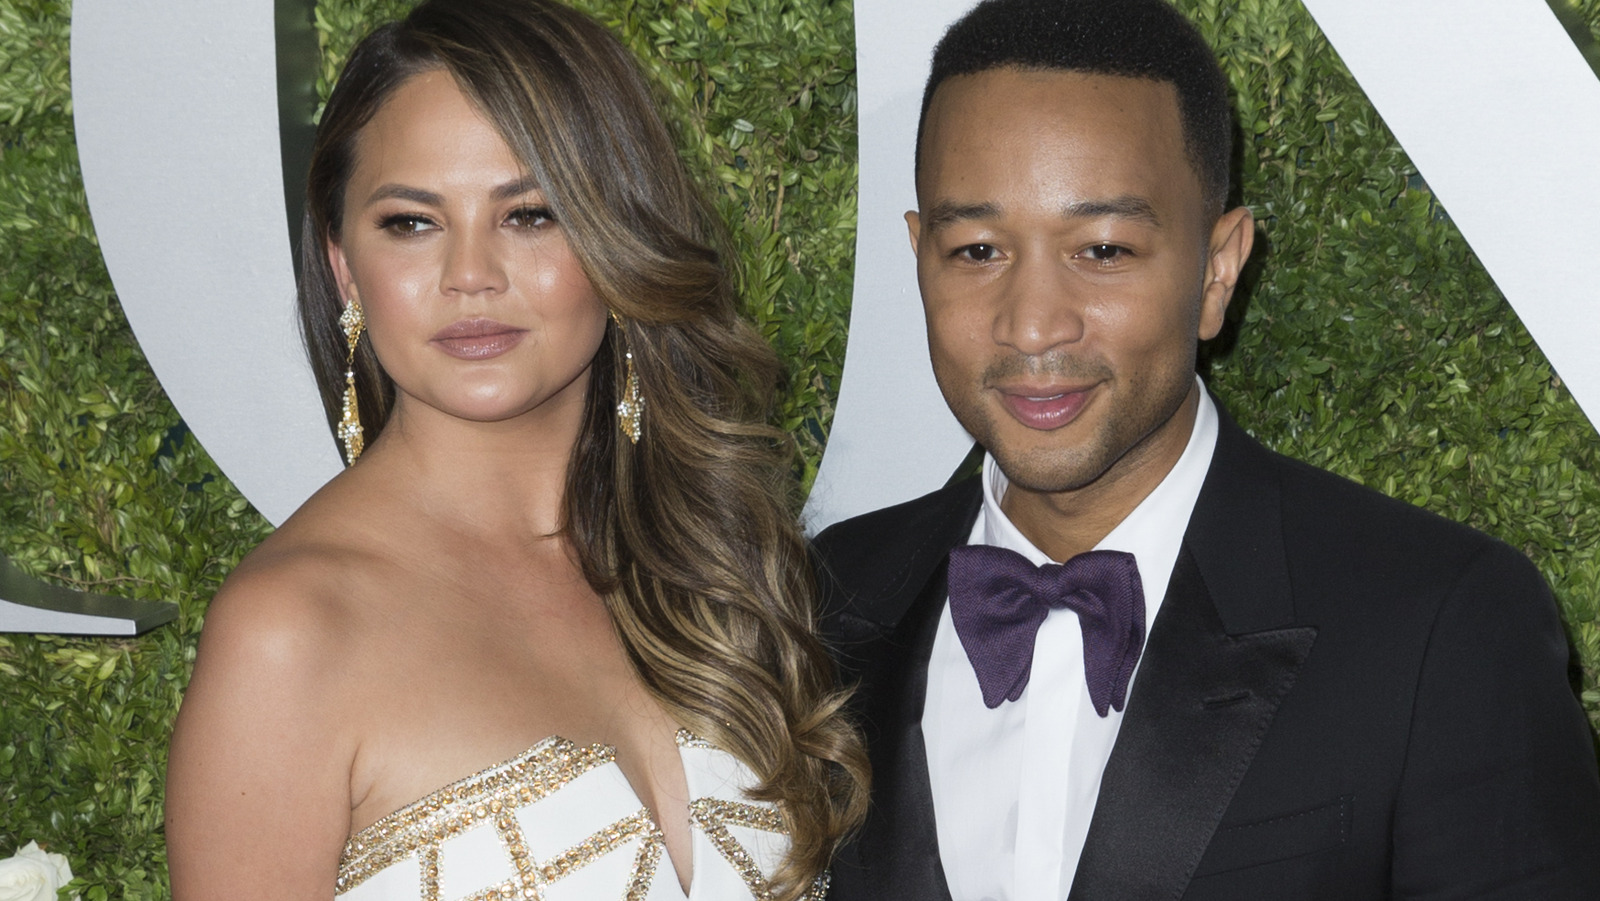 This Cake Was Served At Chrissy Teigen And John Legend's Wedding